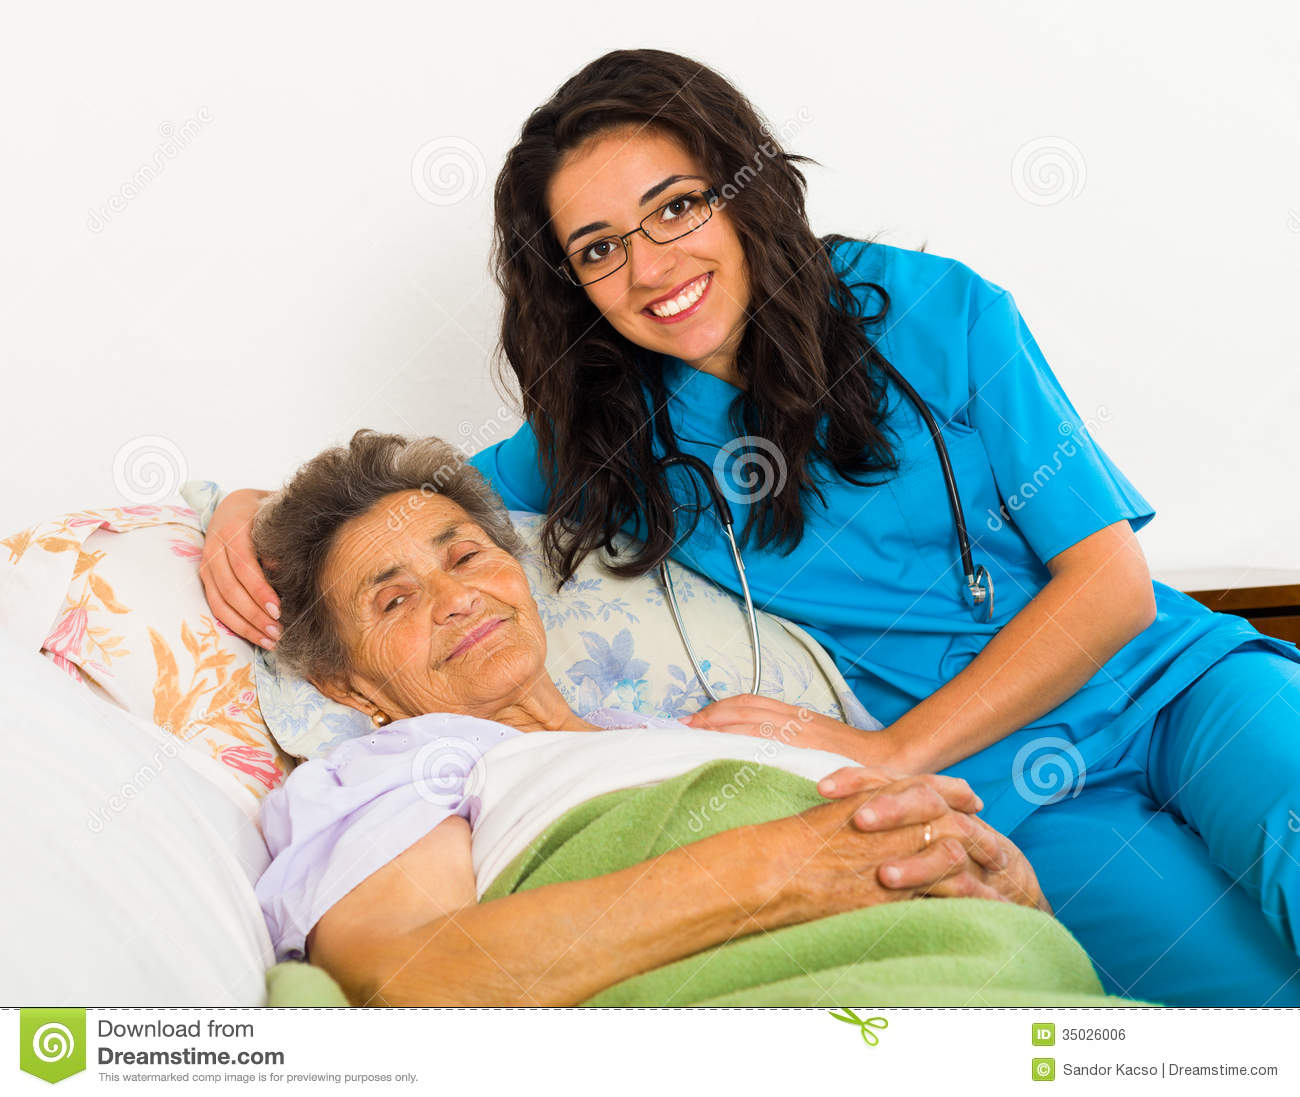 Nurse Caring For Elder Patients Royalty Free Stock Image   Image    